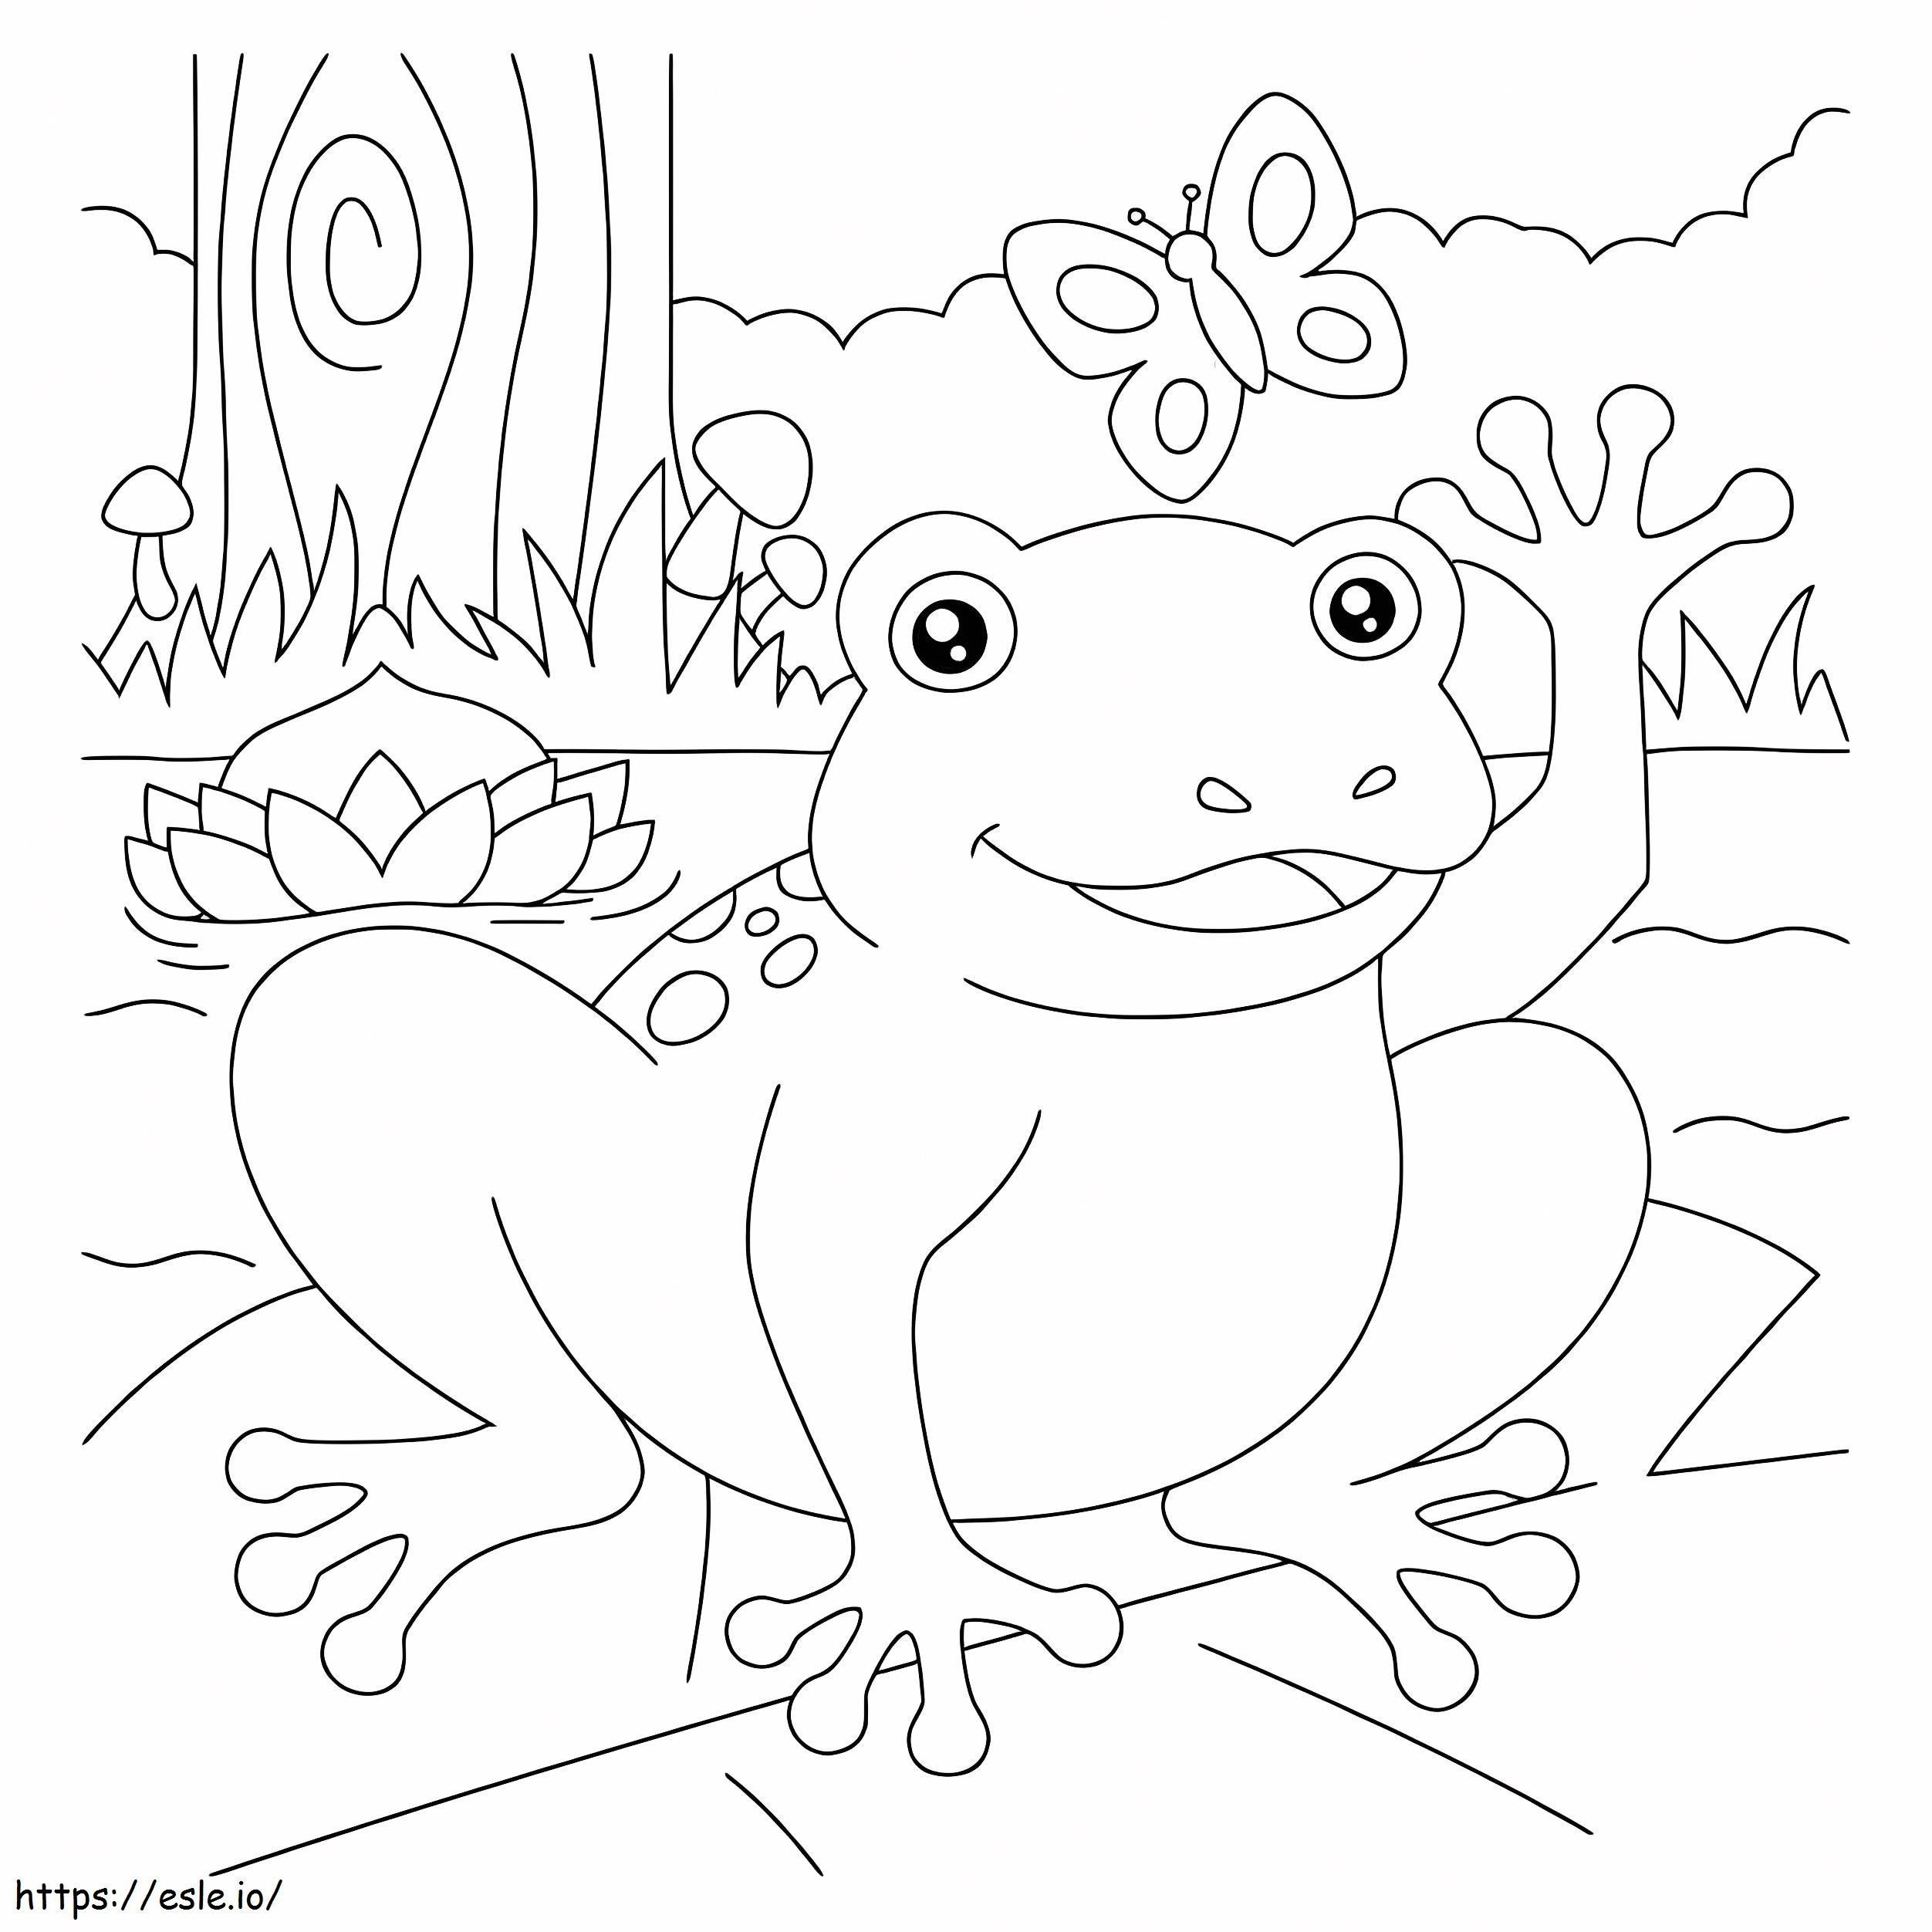 Frog And Butterfly coloring page